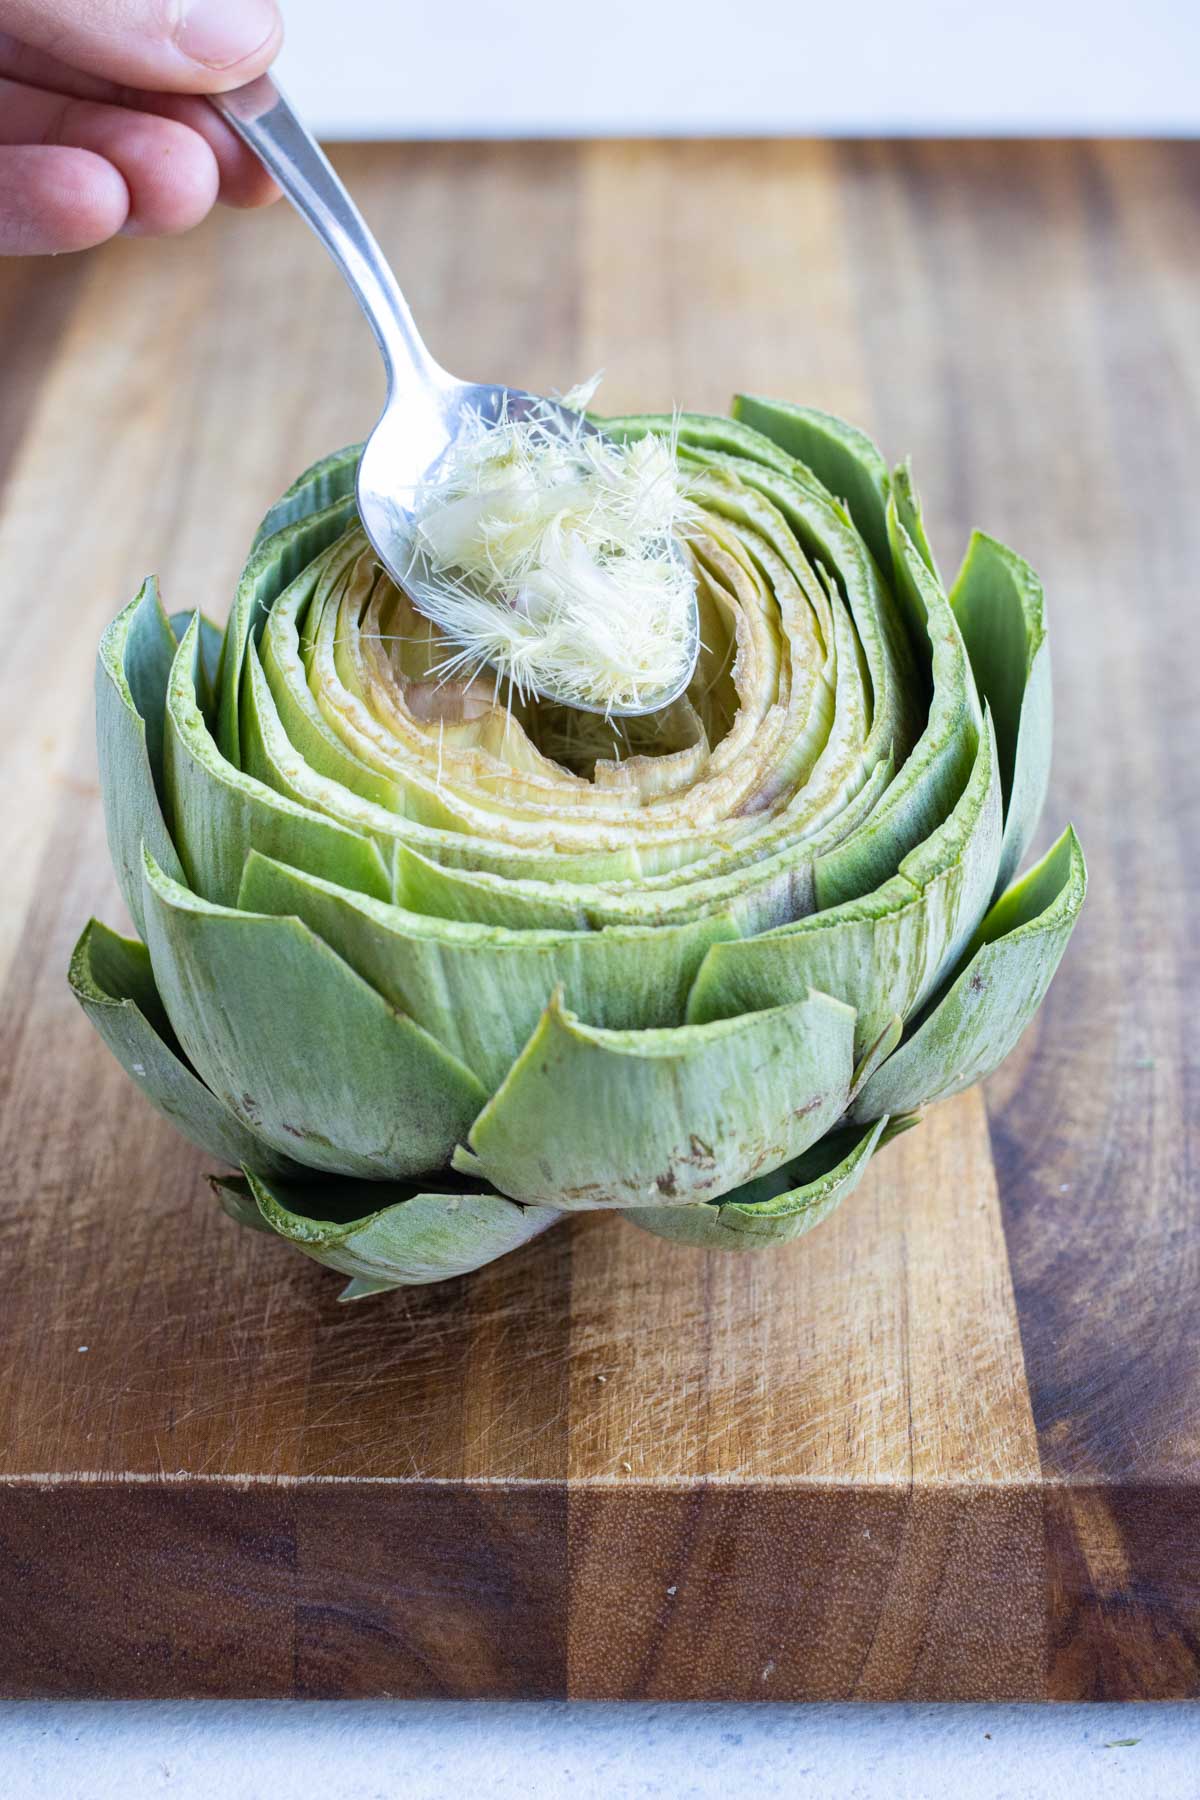 Mix is added to the center of the artichoke by a spoon.